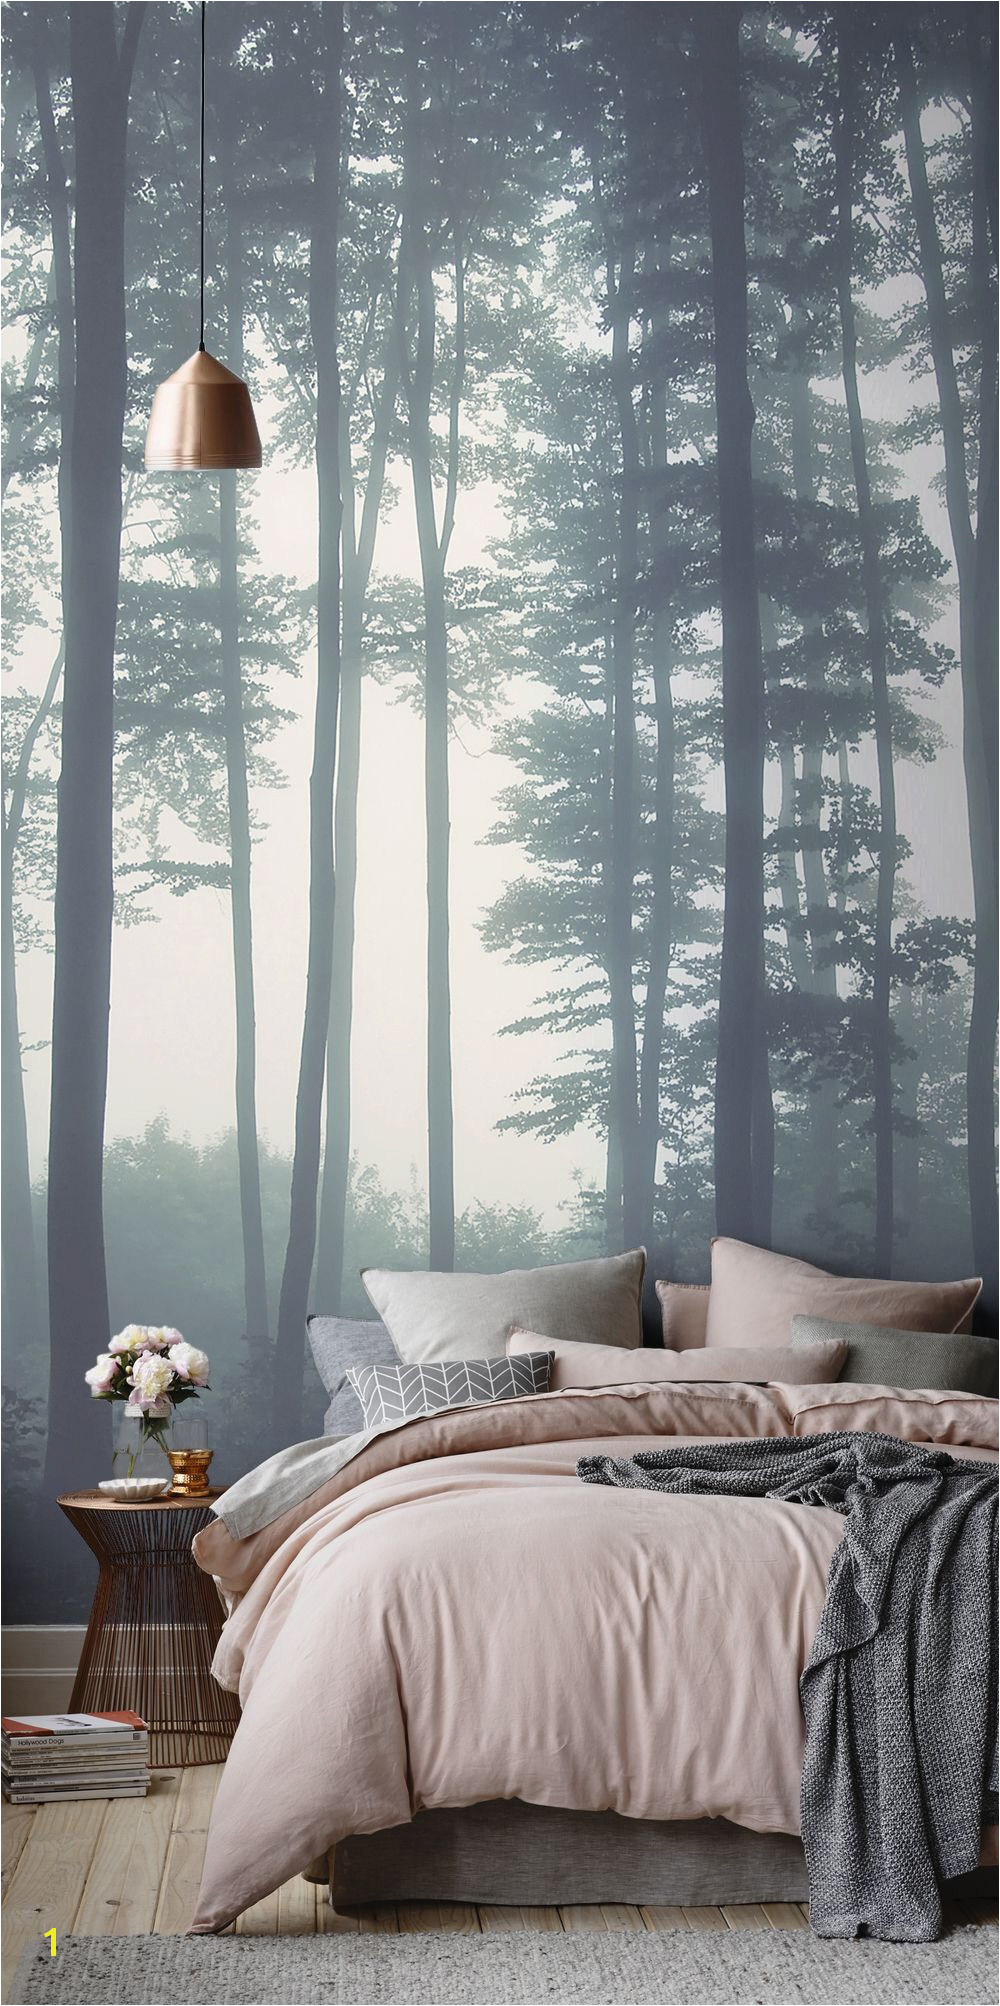 Create a dreamy bedroom interior with our Sea of Trees wallpaper mural Mesmerising steely blue tones add an air of mystery to your interiors